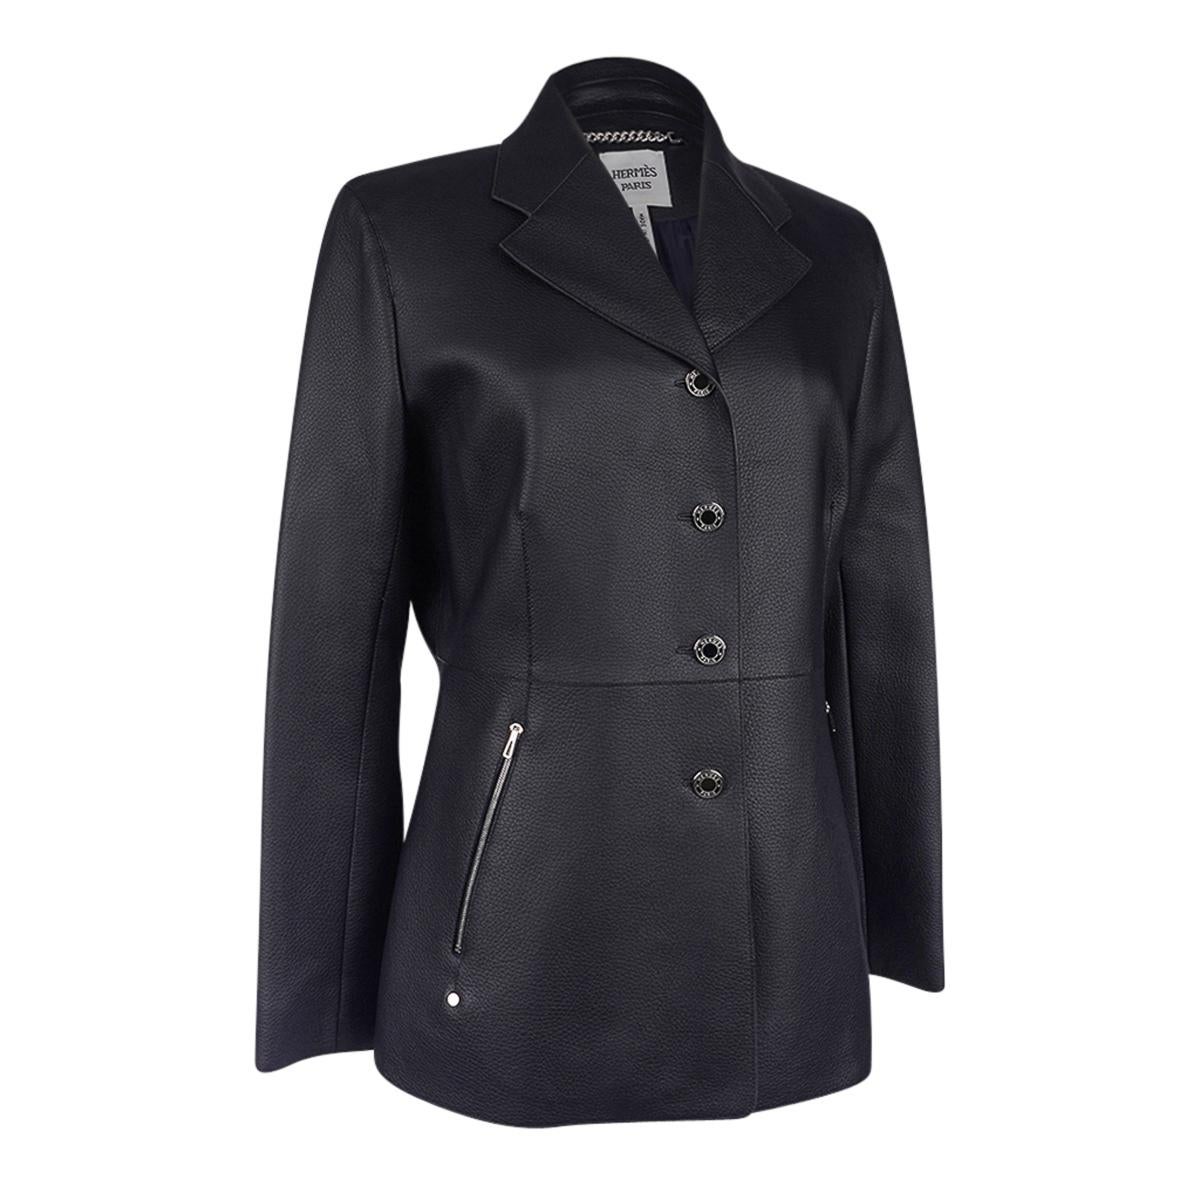 Mightychic offers a beautifully shaped Hermes jacket featured in Marine Deerskin.
Designed by Jean Paul Gaultier.
Four (4) mirror buttons with Hermes name.
Two (2) zip pockets with logo embossed pulls.
Rear has a design detail to accentuate the